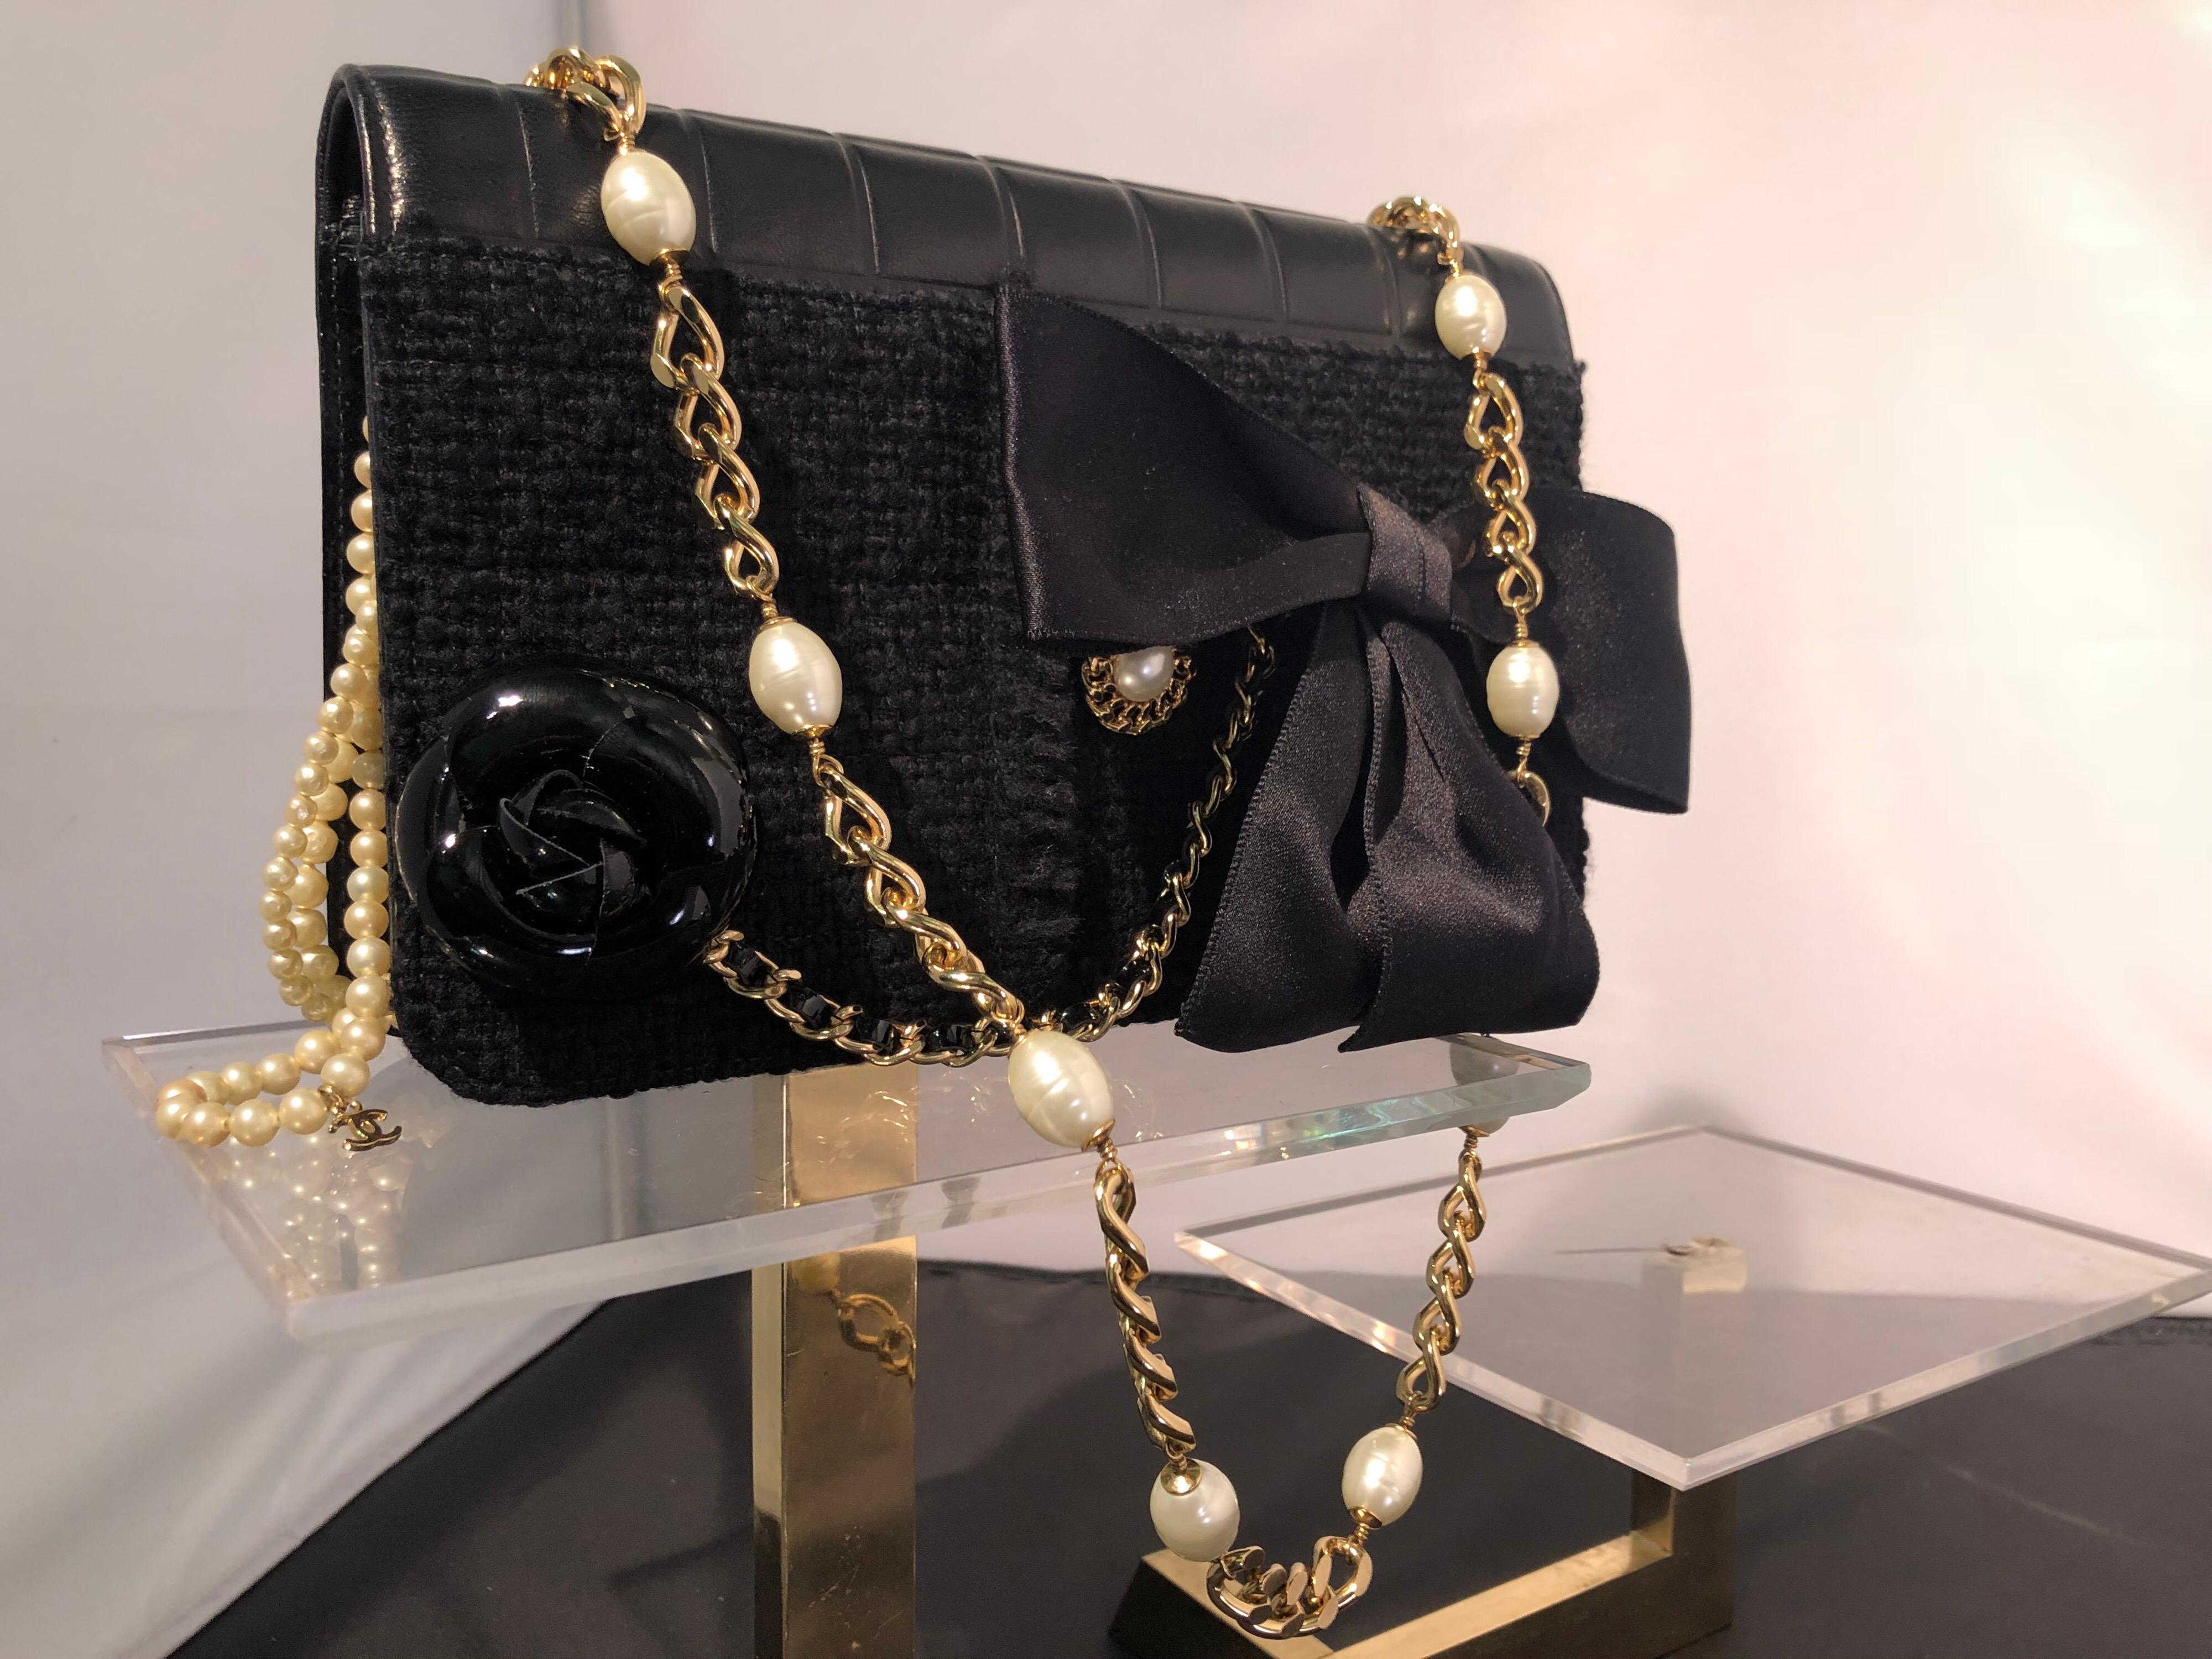 Up for grabs is this collectible and very rare Chanel handbag made of mixed media fabrics and all the classic trimmings. A black wool boucle body, black patent leather gussets, black kid leather quilting and back pocket of wool gaberdine make this